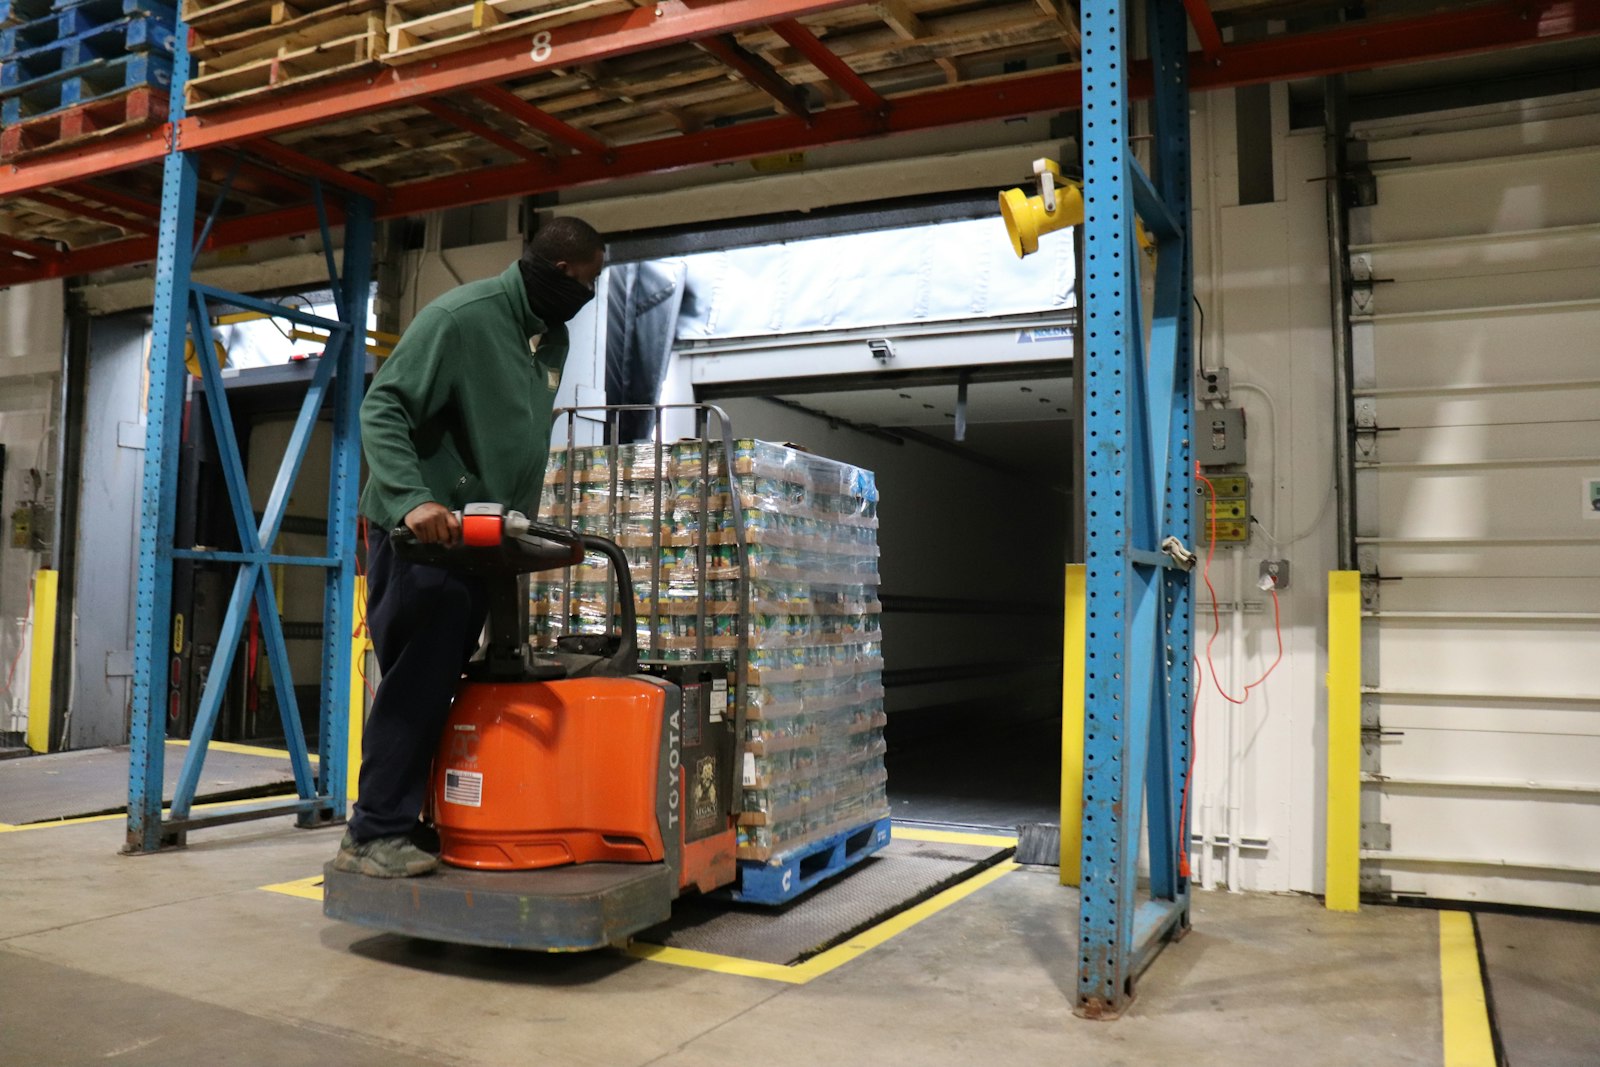 A volunteer loads a pallet of food onto a forklift at Gleaners' warehouse site. While the nonprofit purchases food in bulk from local producers, farms and wholesalers, Gleaners says it projects to spend substantially more this year, even as the need for food remains high two years after the start of the COVID-19 pandemic. (Courtesy of Gleaners Community Food Bank)